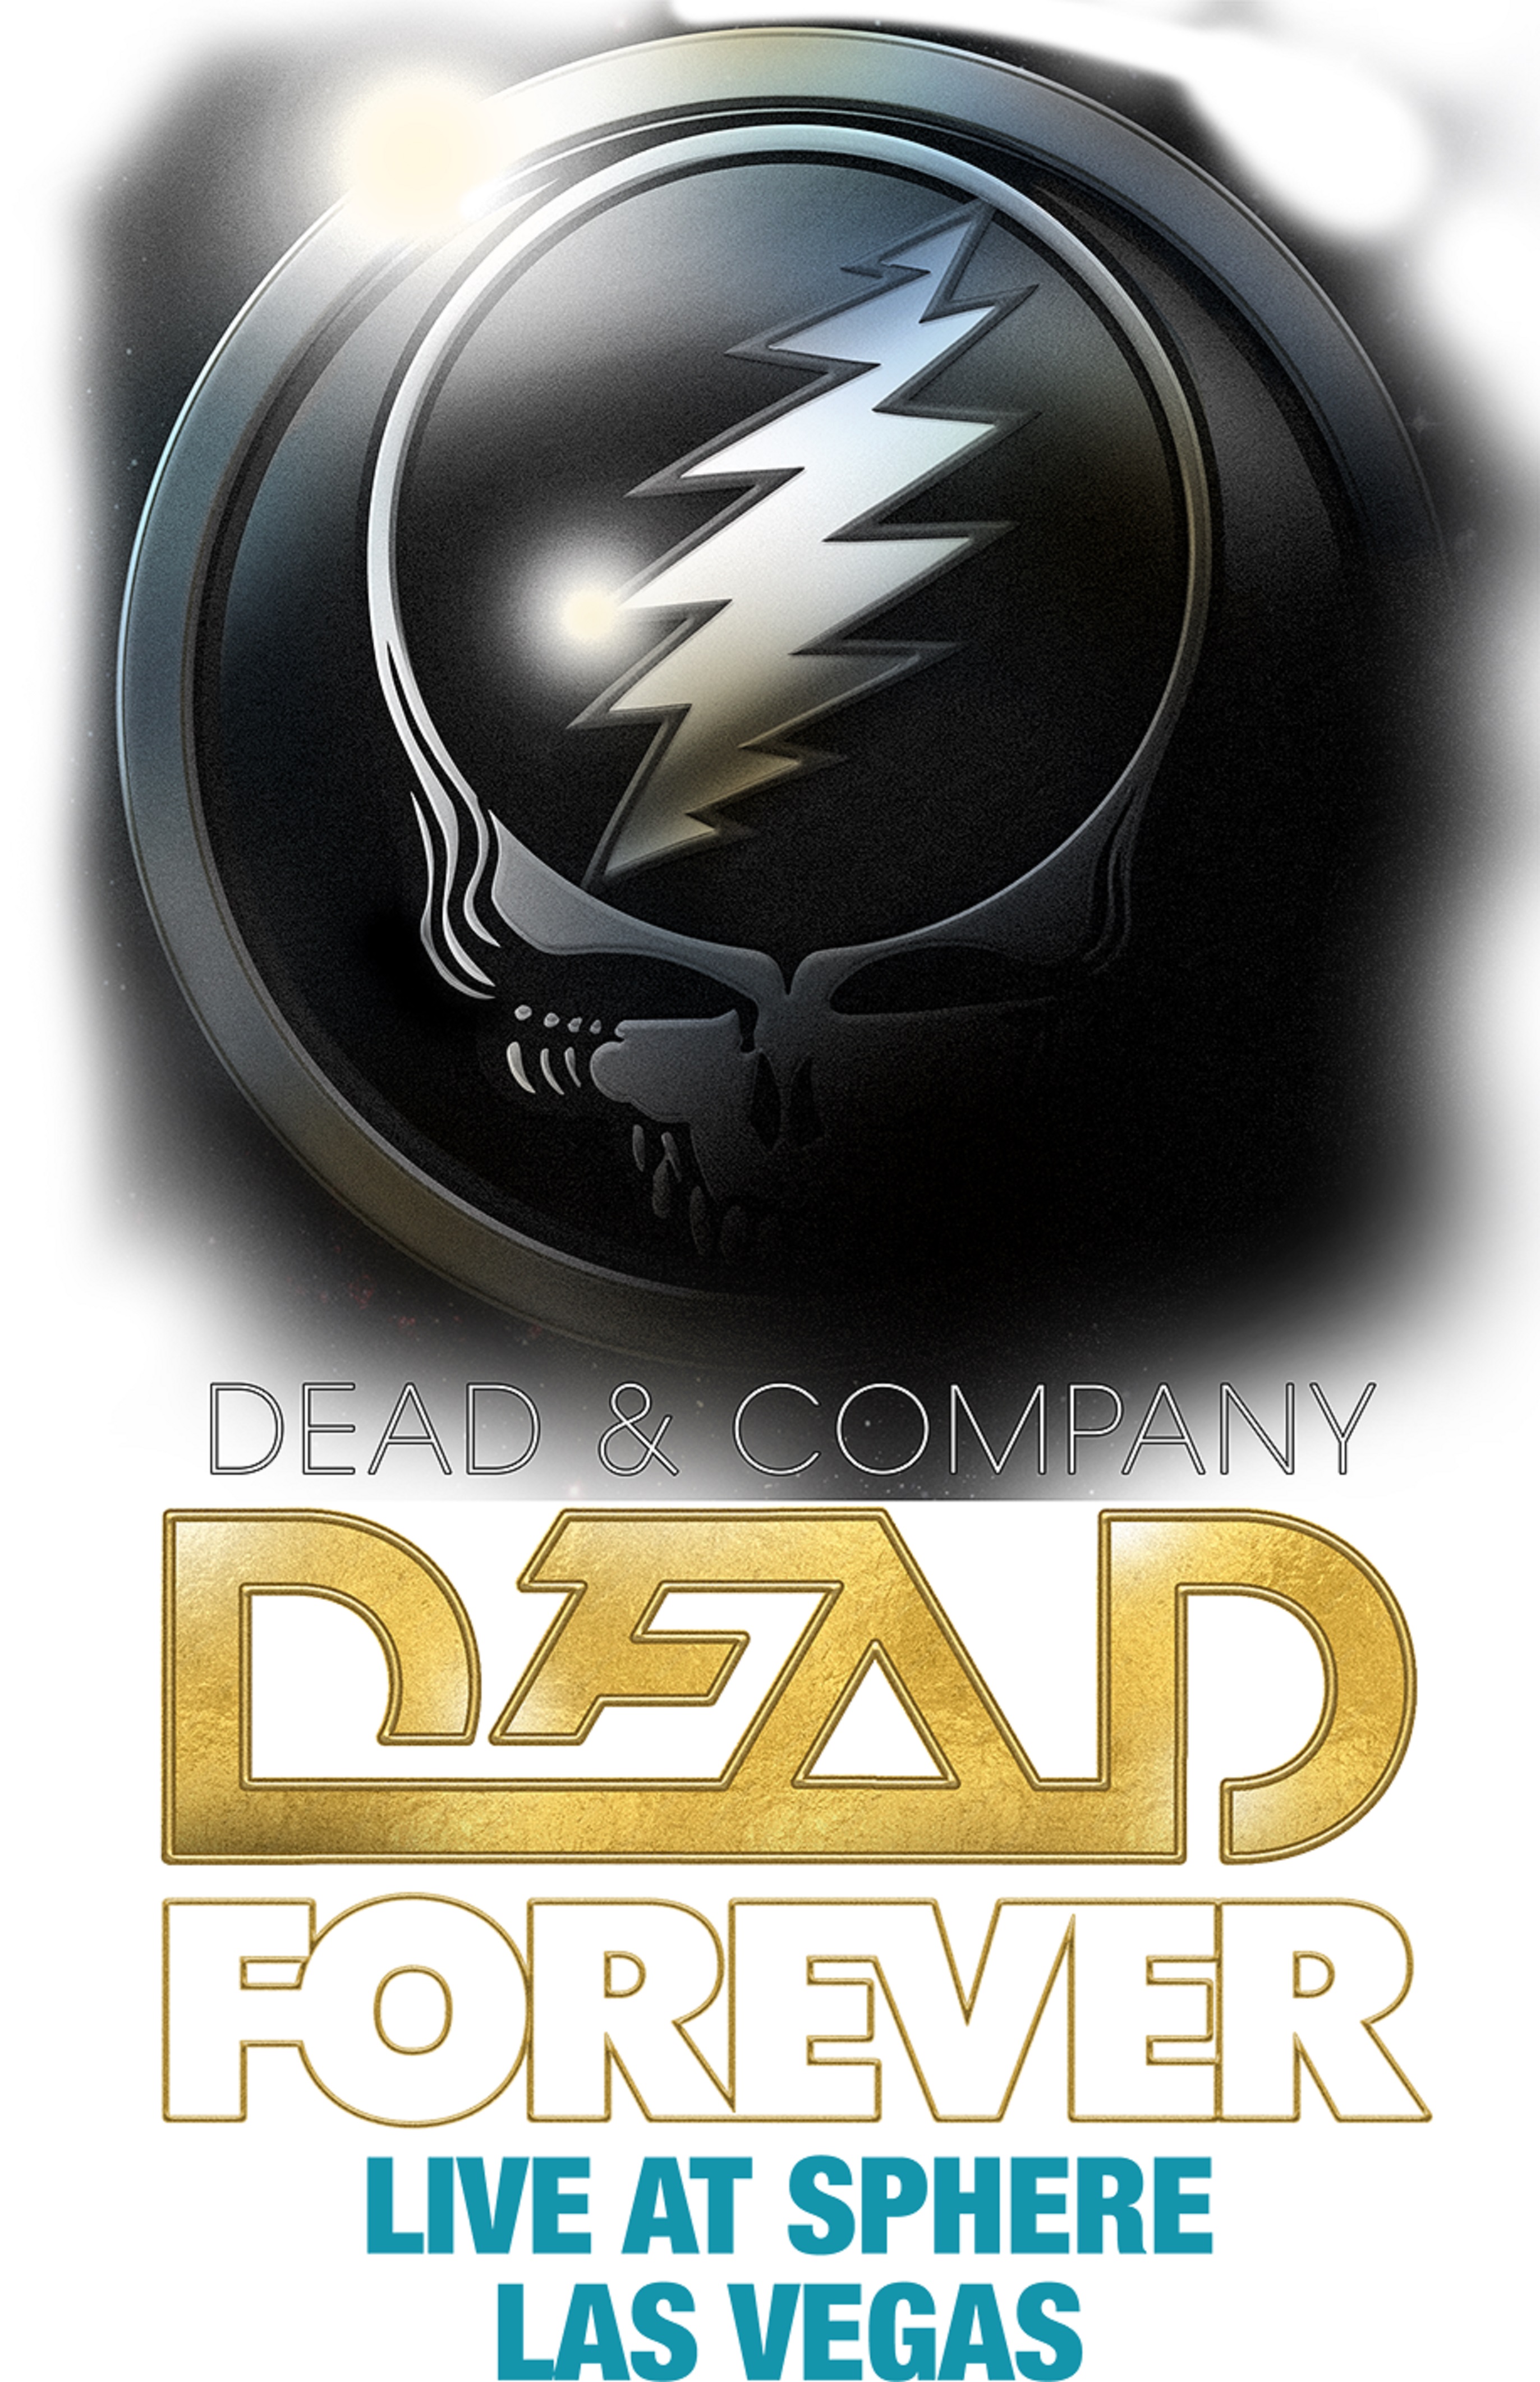 Dead & Company Adds Six More Shows Due to Overwhelming Demand